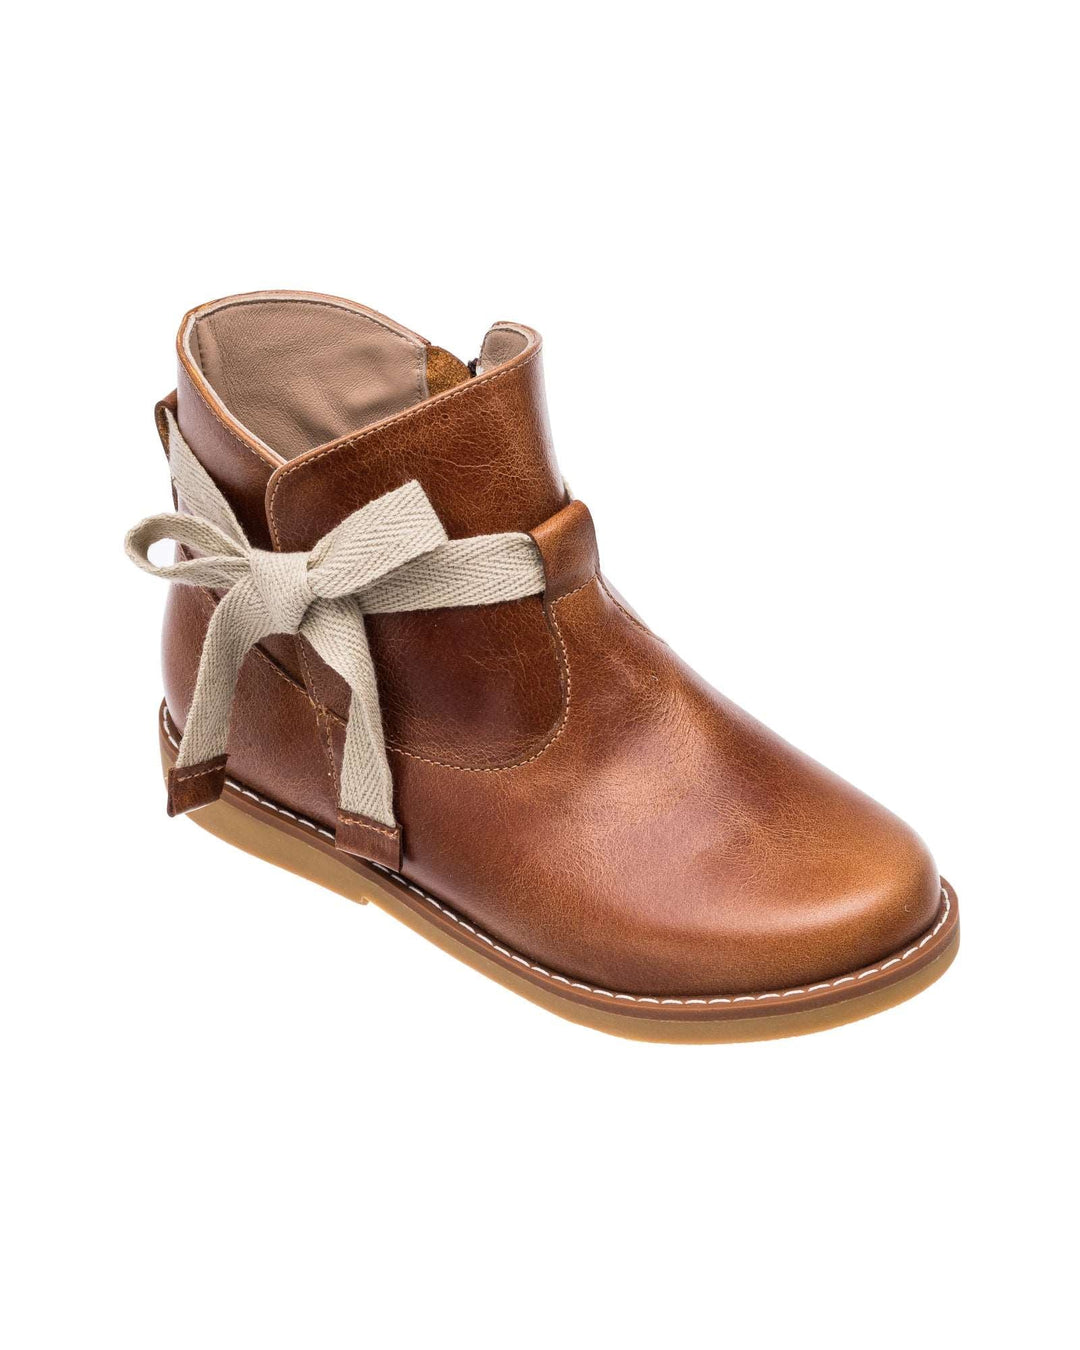 Sunny Bootie w/ Bow - Brown